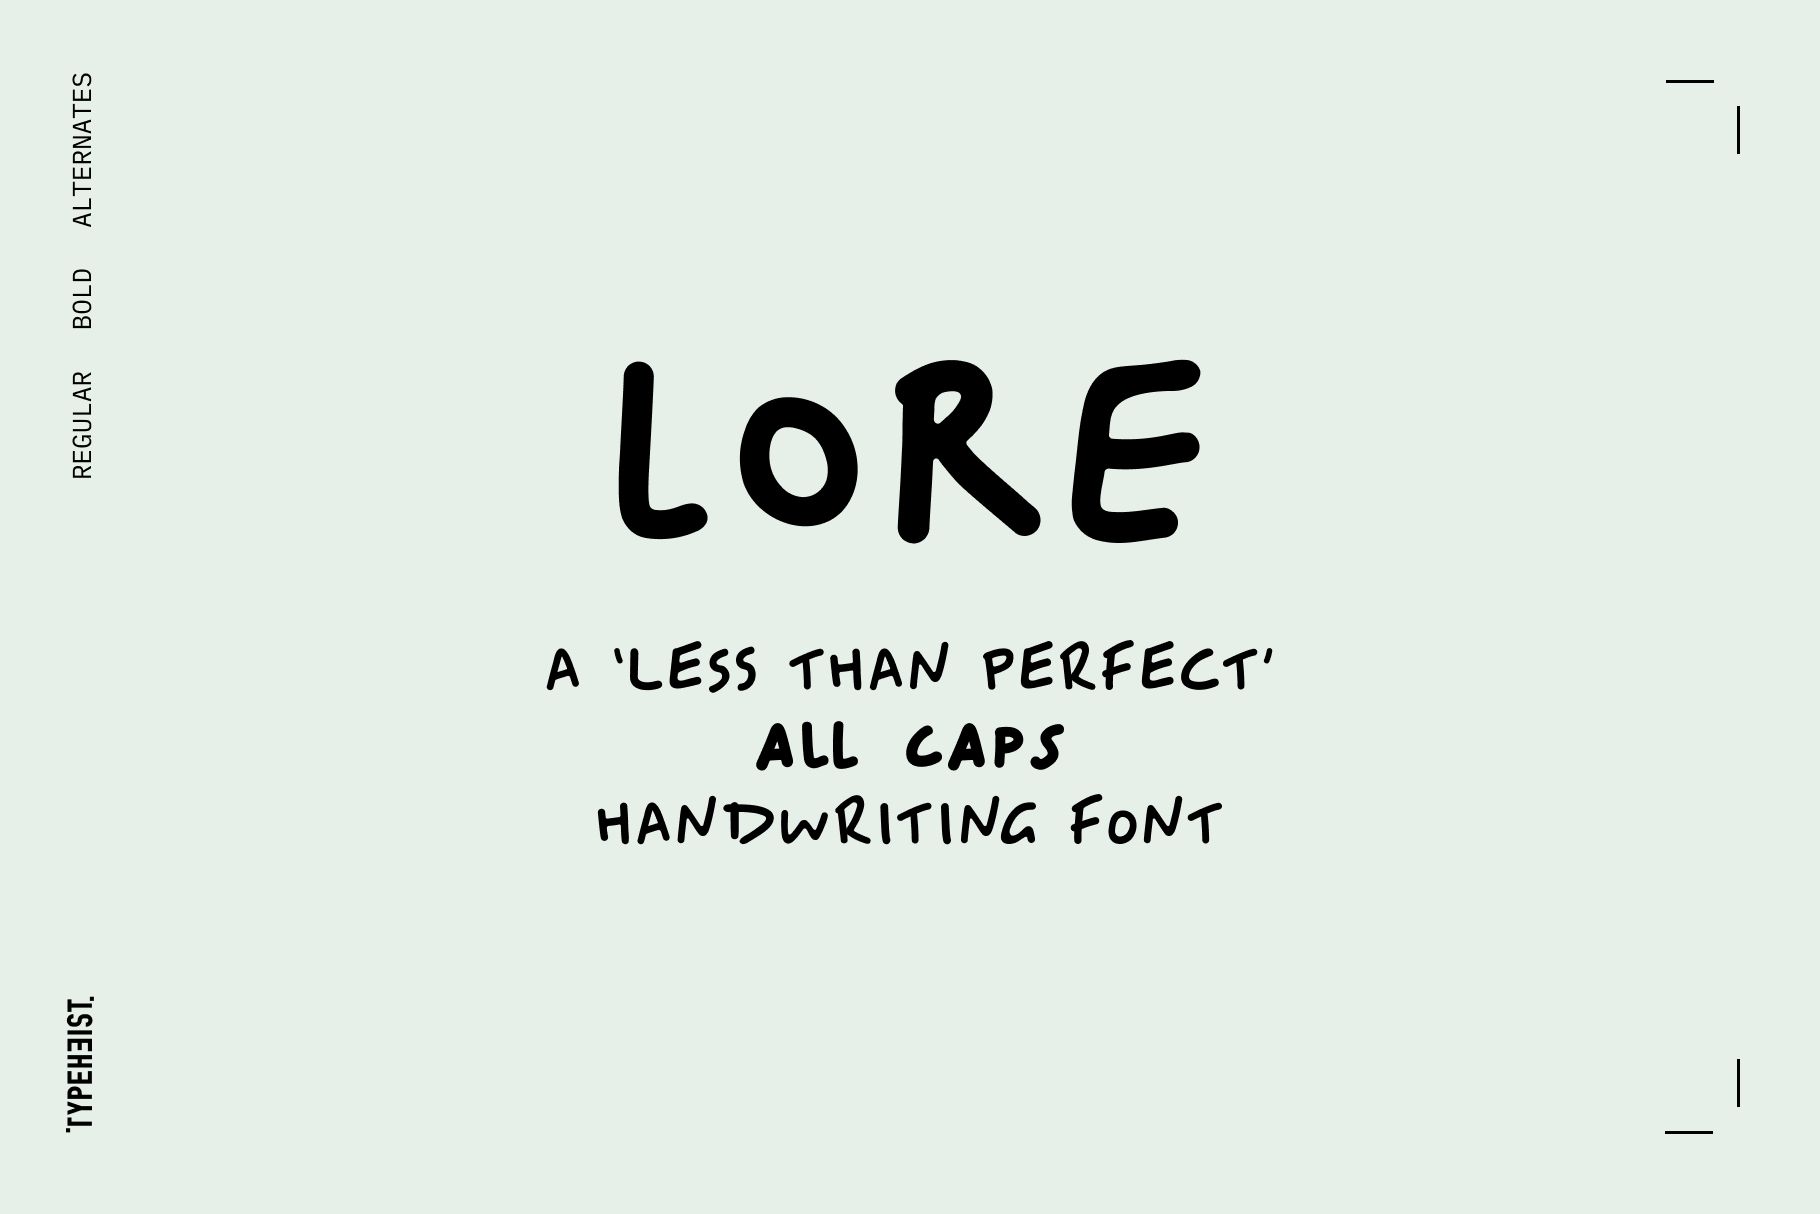 Lore: A 'less than perfect' all caps handwriting font